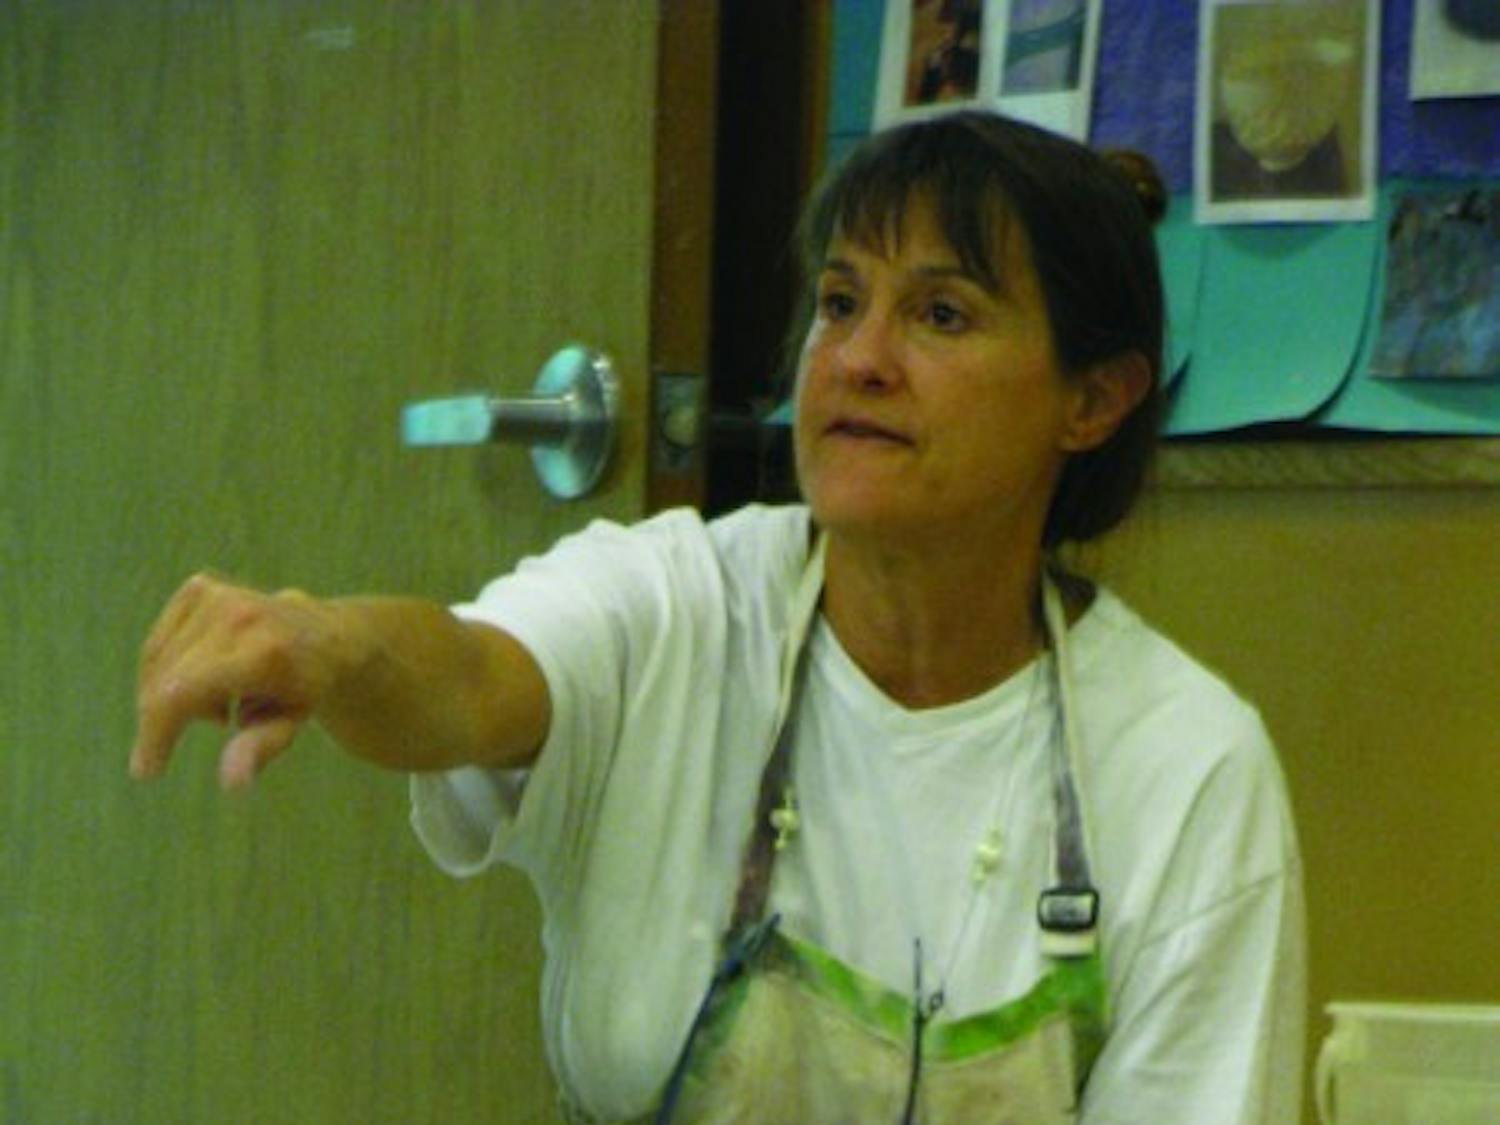 Teresa Davis instructs her students during beginning throwing, a ceramics leisure course held in the J. Wayne Reitz Union&nbsp;Basement in the Arts &amp; Crafts Center.